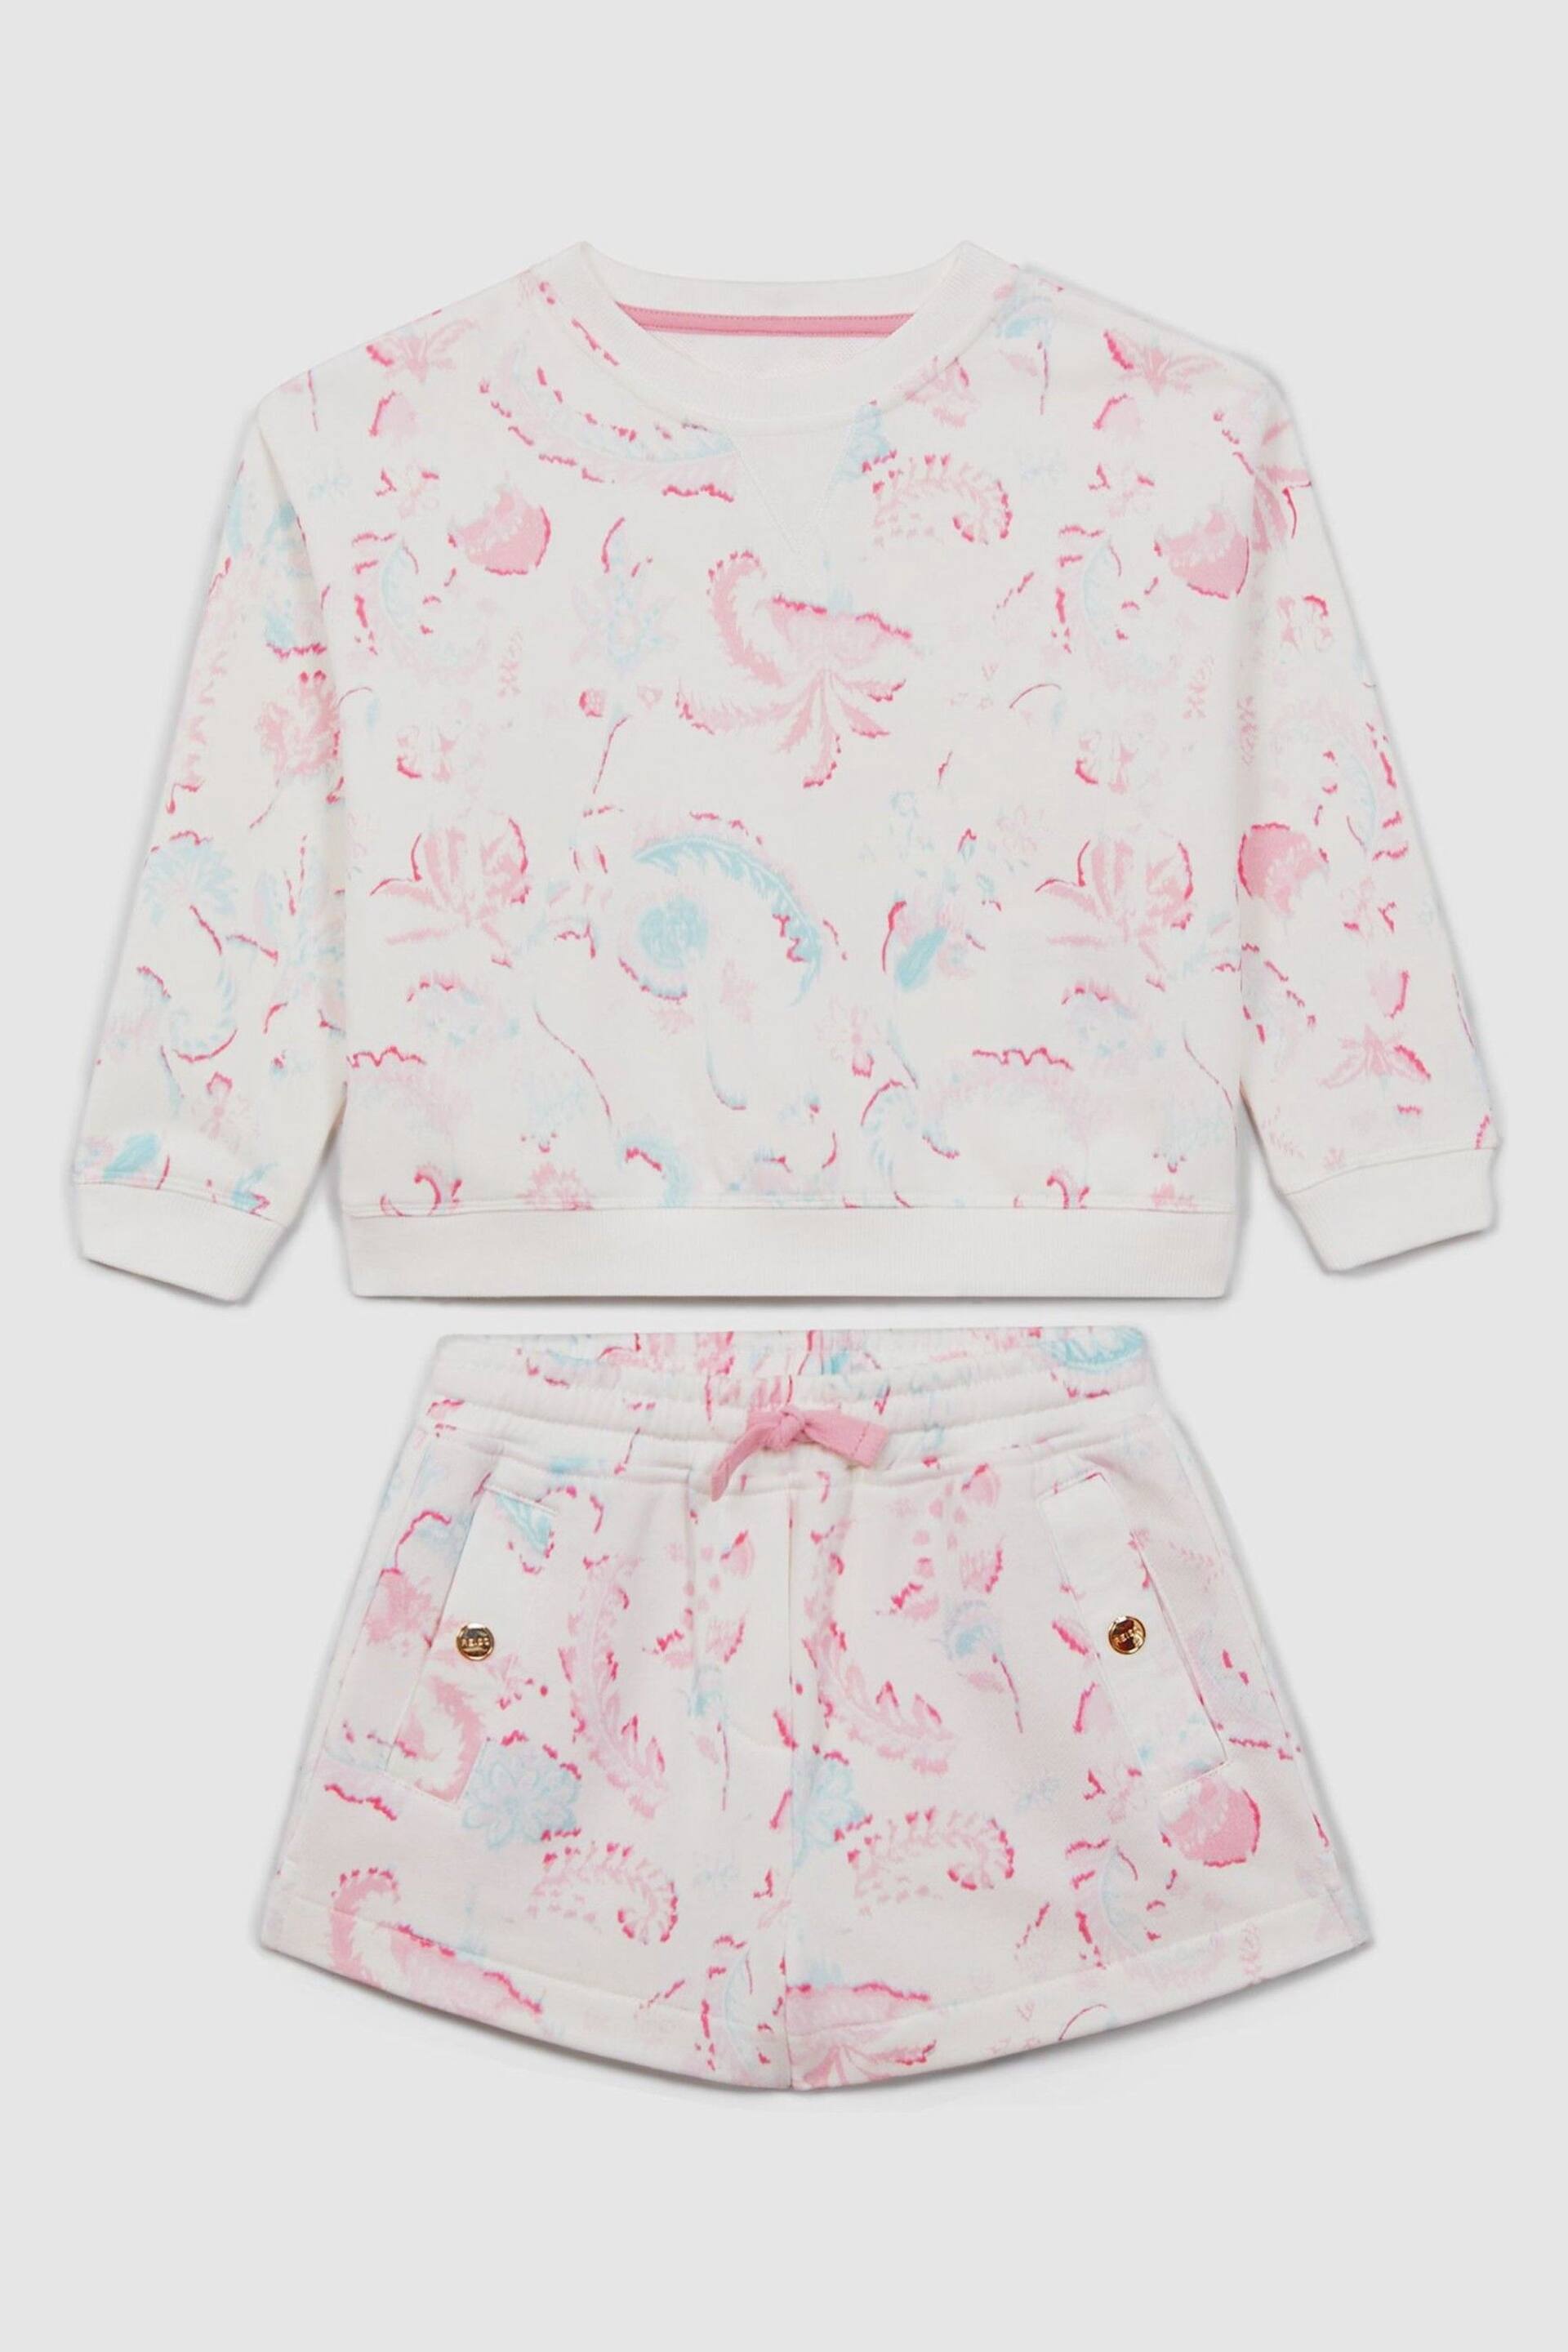 Reiss Pink Jessie Teen Crew Neck Jumper and Shorts Set - Image 2 of 7